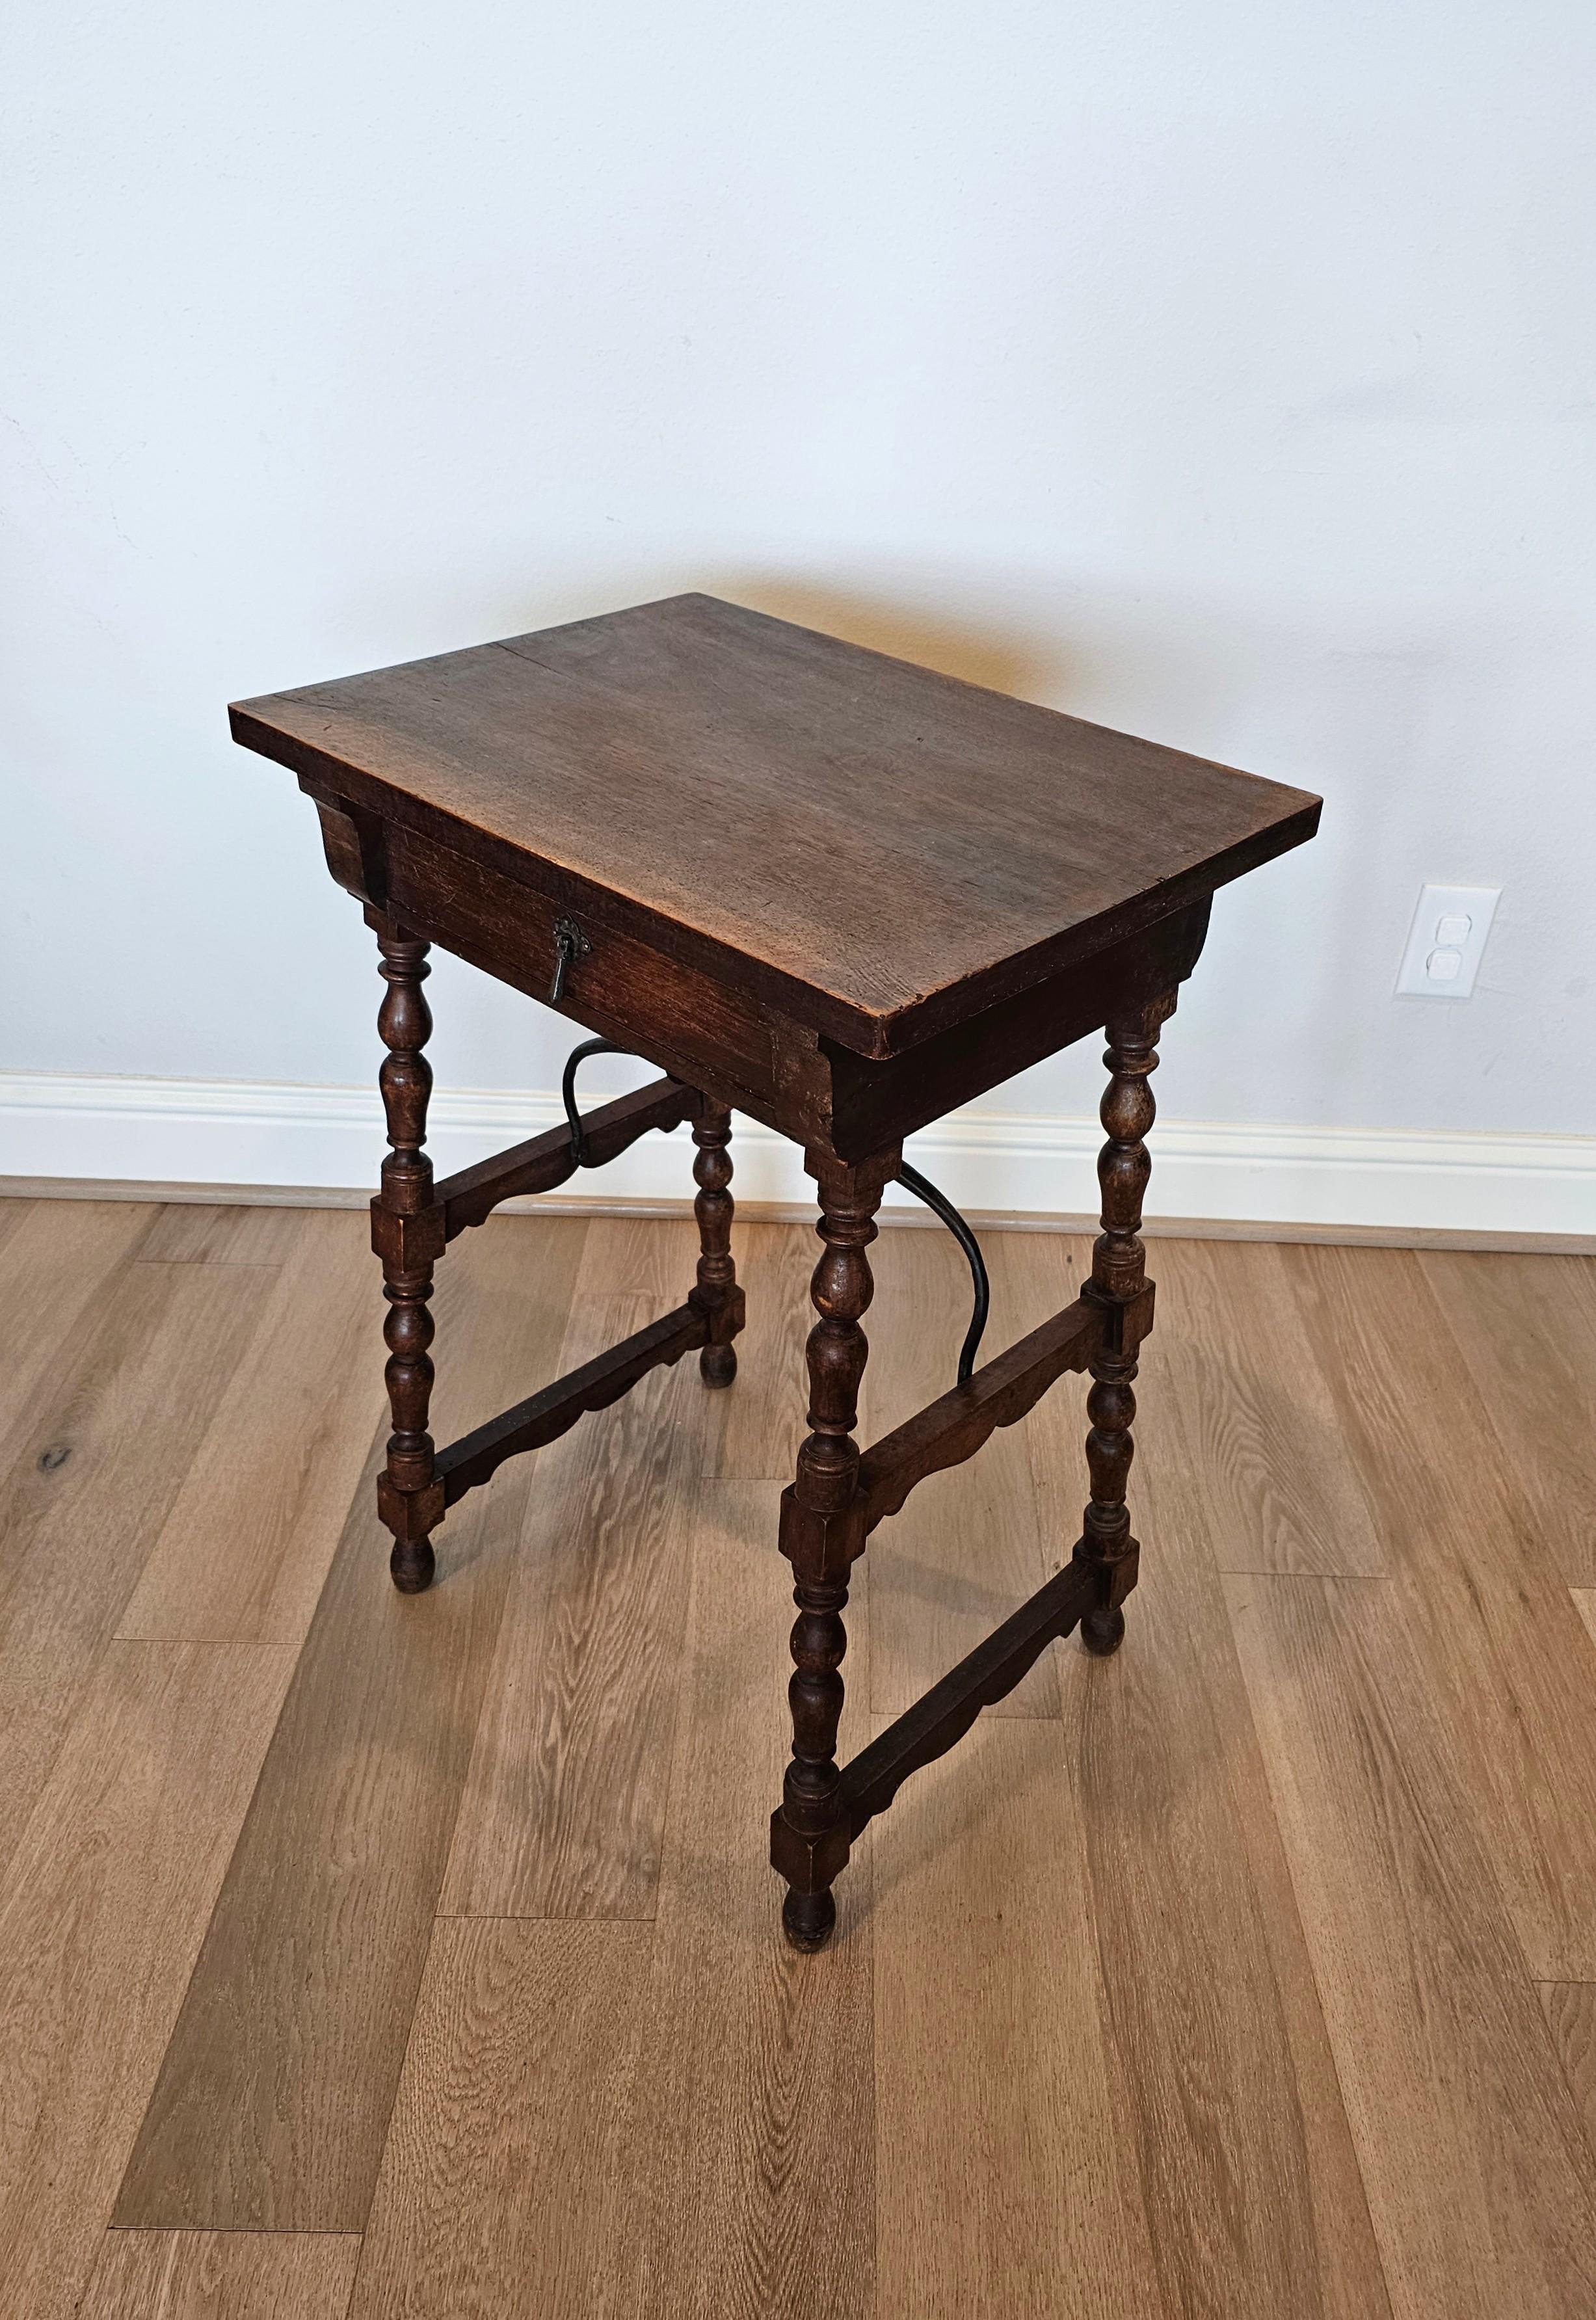 A charming rustic antique Spanish walnut work / side table with nicely aged patina. 

Born in Spain, circa 1860s, hand-crafted of warm rich solid walnut wood, exceptionally executed in old world European Baroque style, having a rectangular single